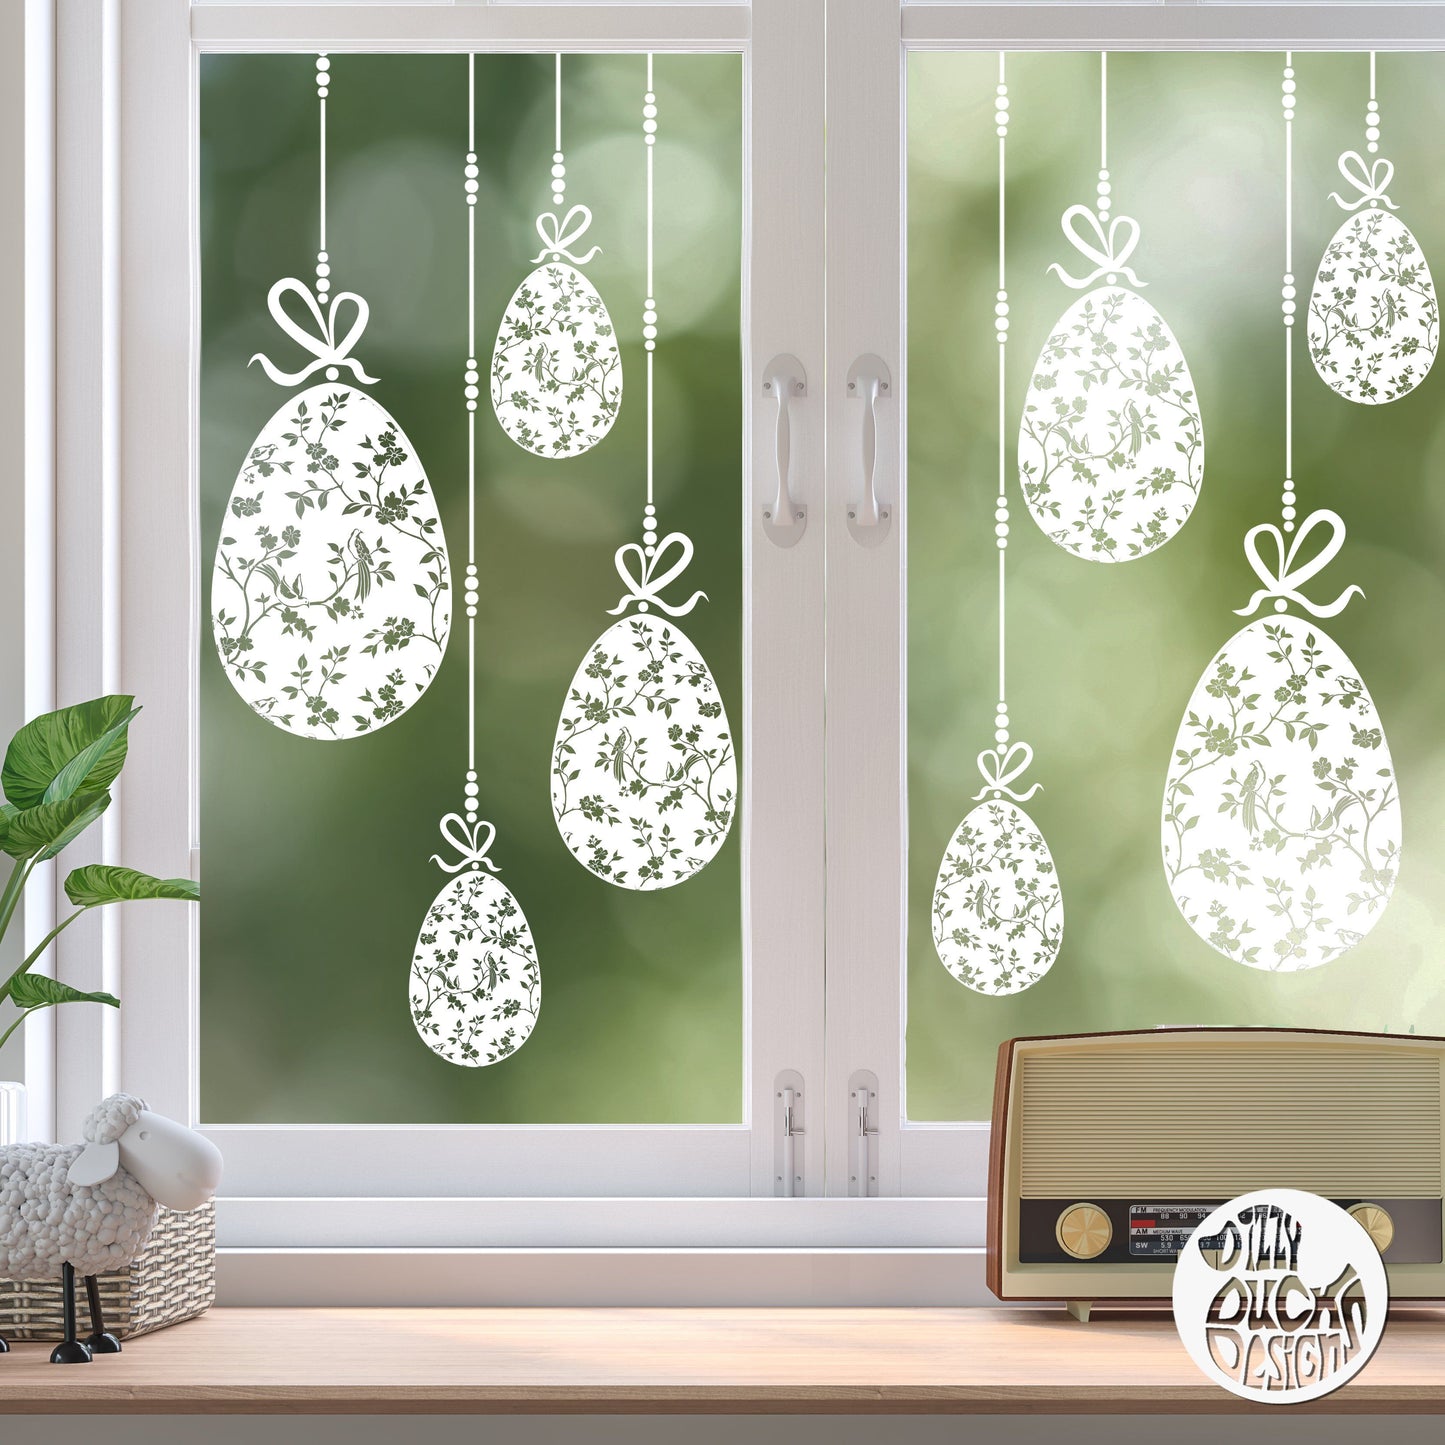 Decal 10 x Chinoiserie Easter Egg Window Decals - White Dizzy Duck Designs